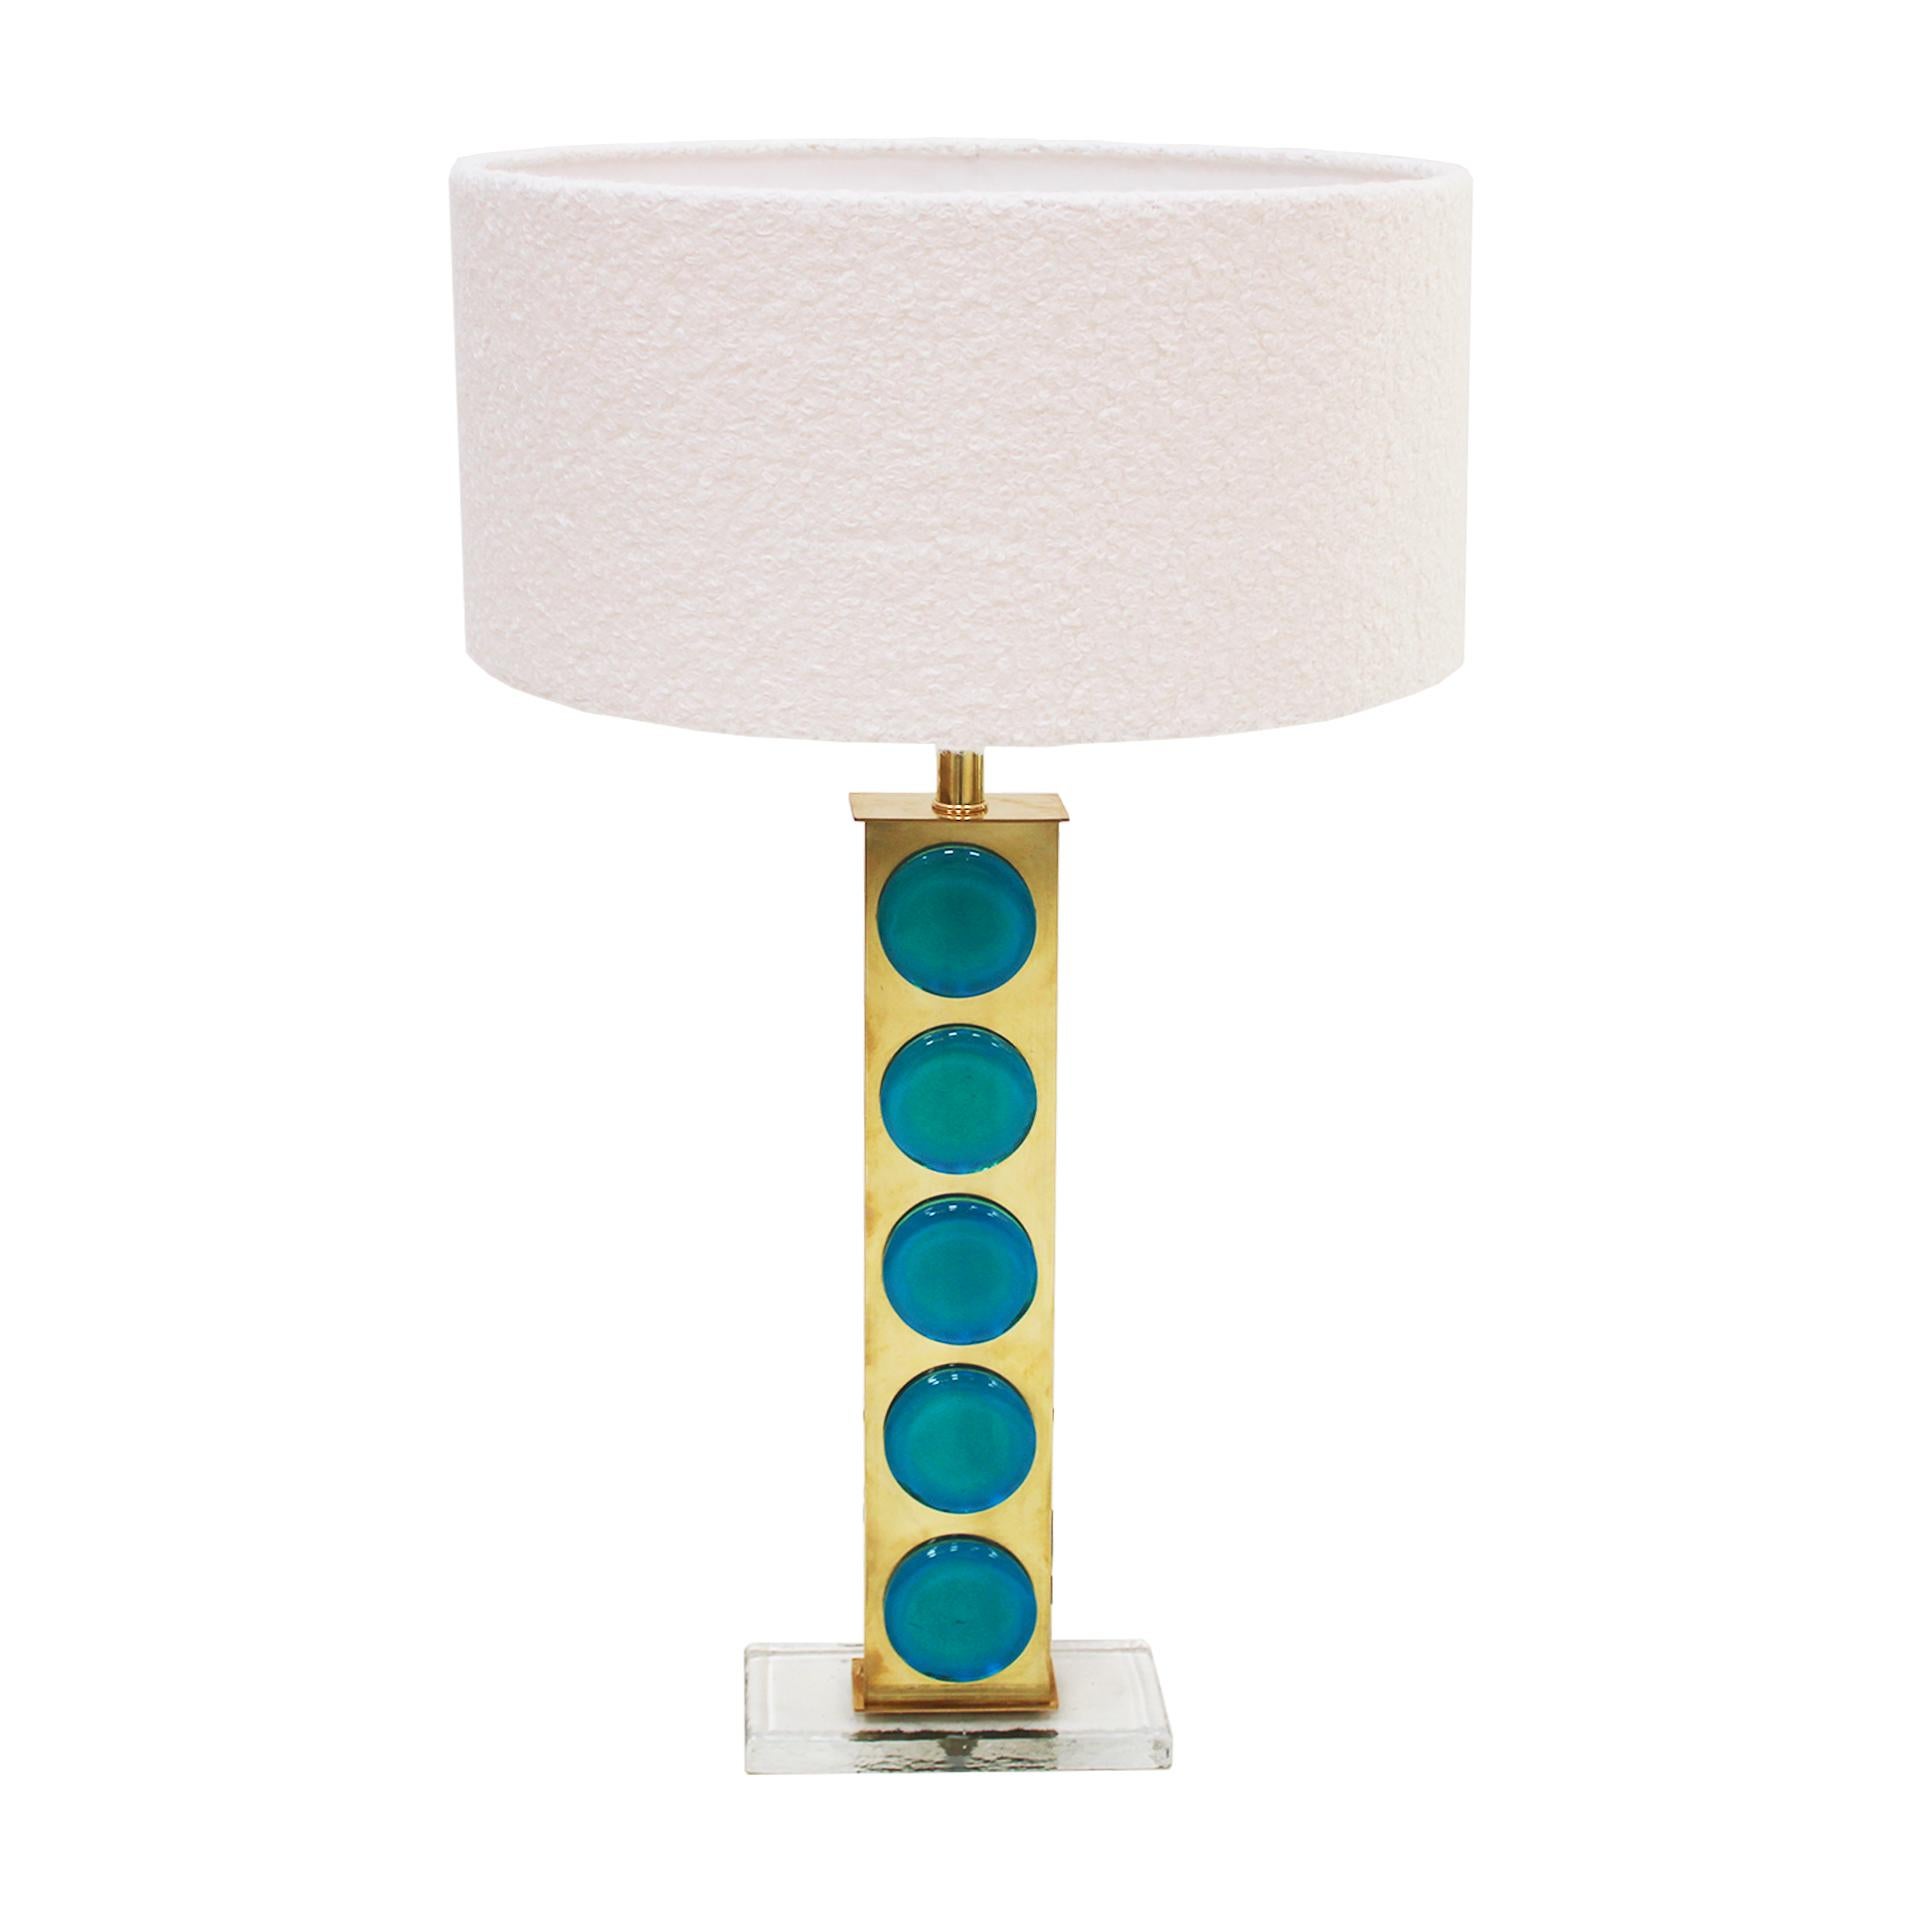 Midcentury style pair of Italian table lamps with brass structure and light blue murano glass pieces. Circular screens in white bouclé.

This mid-century modern style table lamp showcases a beautiful blend of elegance and retro charm. Its brass